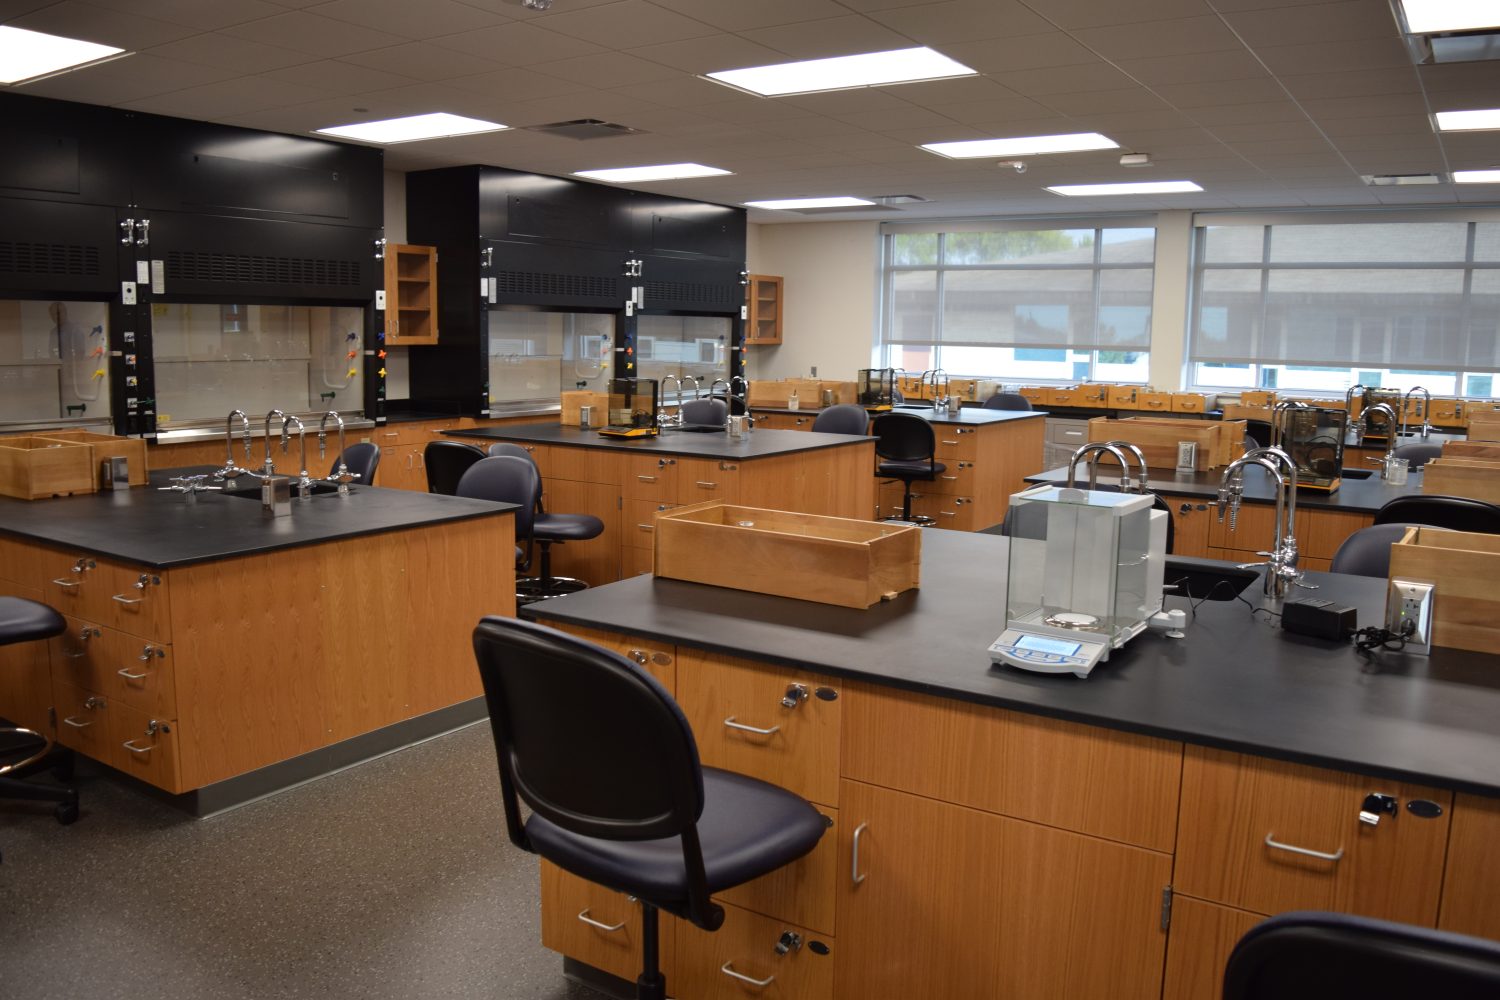 The Everett Roehl STEM Center houses chemistry and microbiology facilities, the certified nursing assistant program, and a community room.